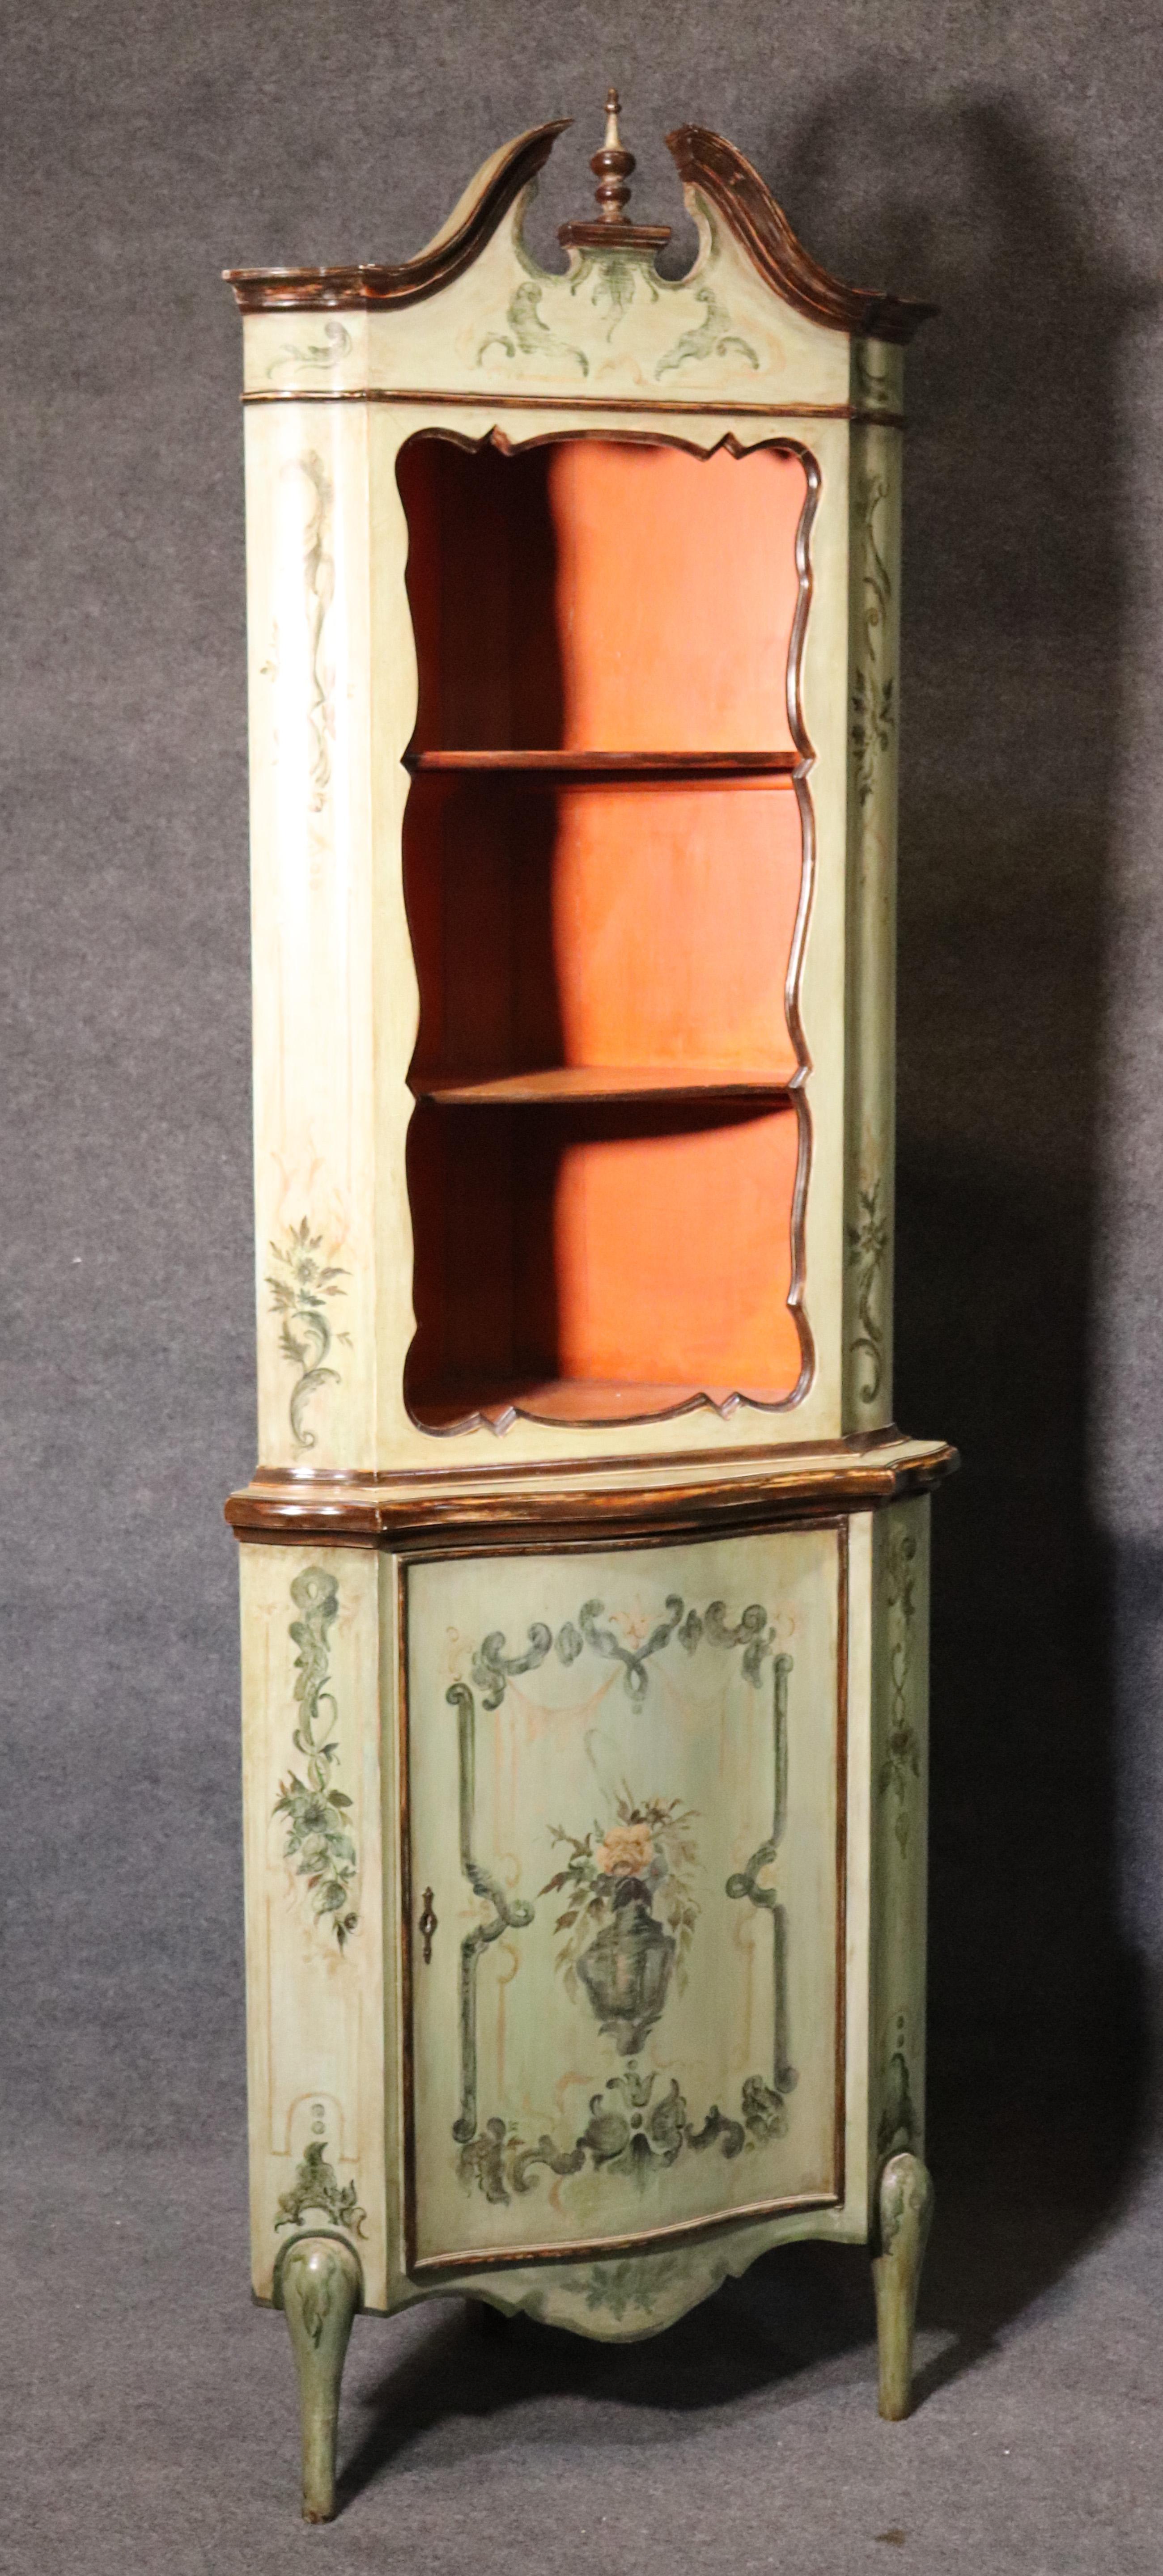 These are hard to find and especially in good condition and in pairs. This pair of hand painted antique Venetian corner cabinets have a wonderful soft grayish green hue with shades of blue and other soft colors with a persimmon interior. The